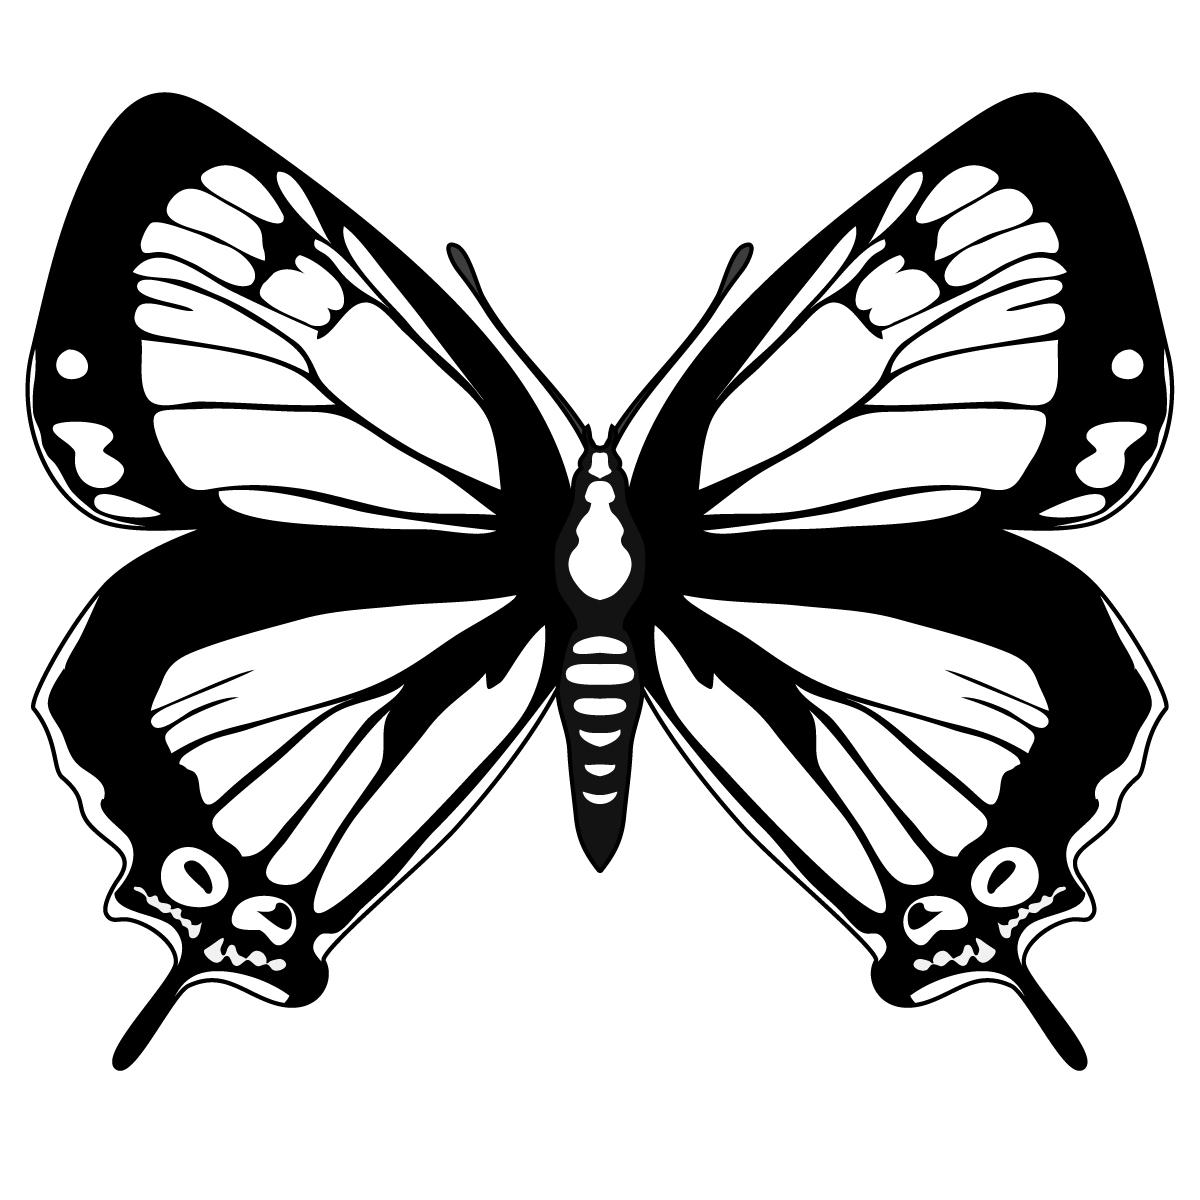 free black and white clipart of butterflies - photo #1